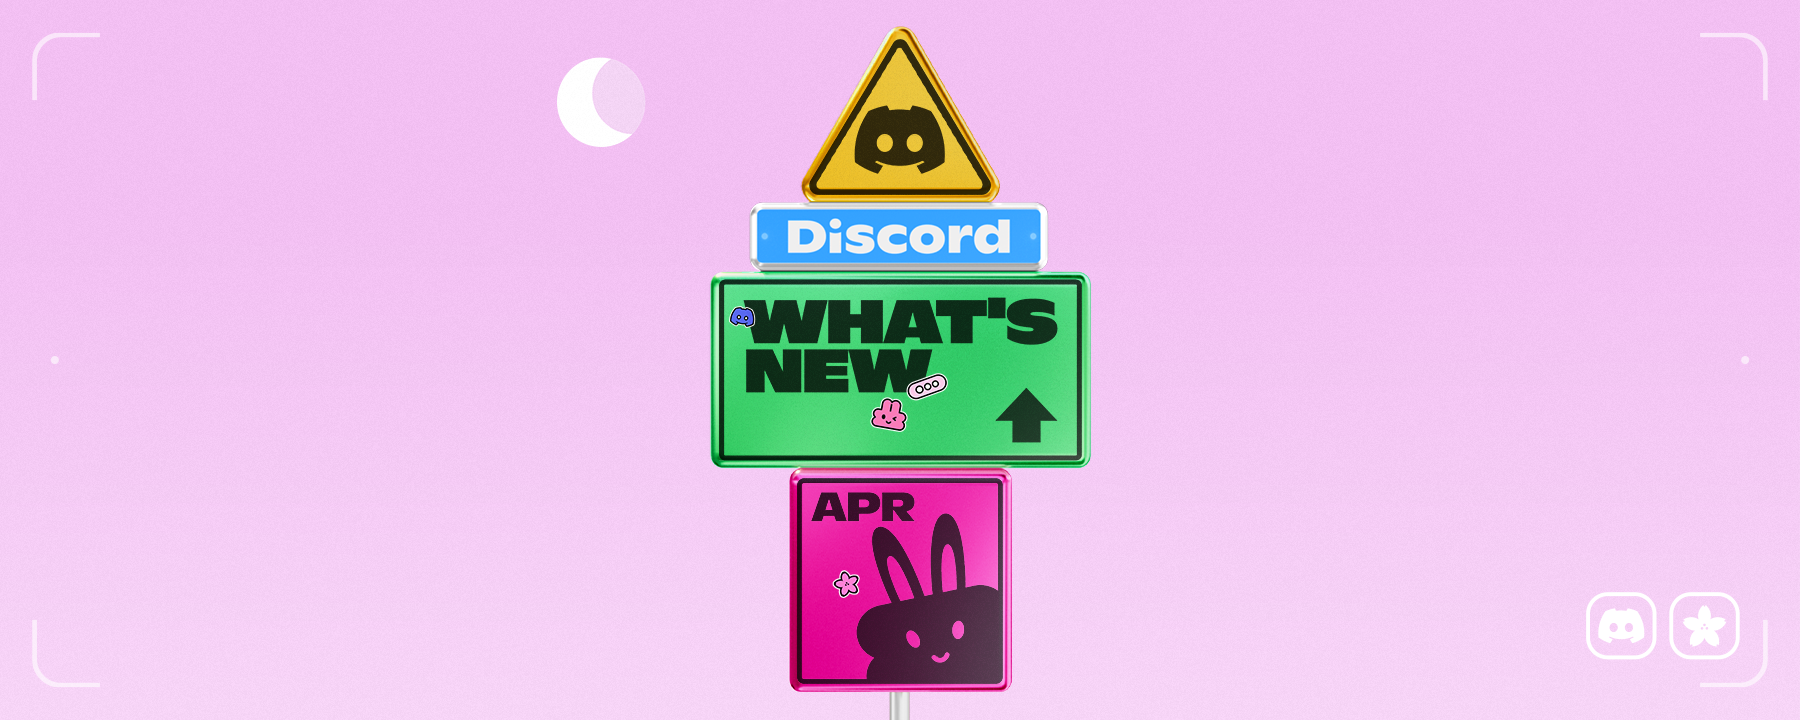 A signpost reading "Discord", "What's New", and "April"